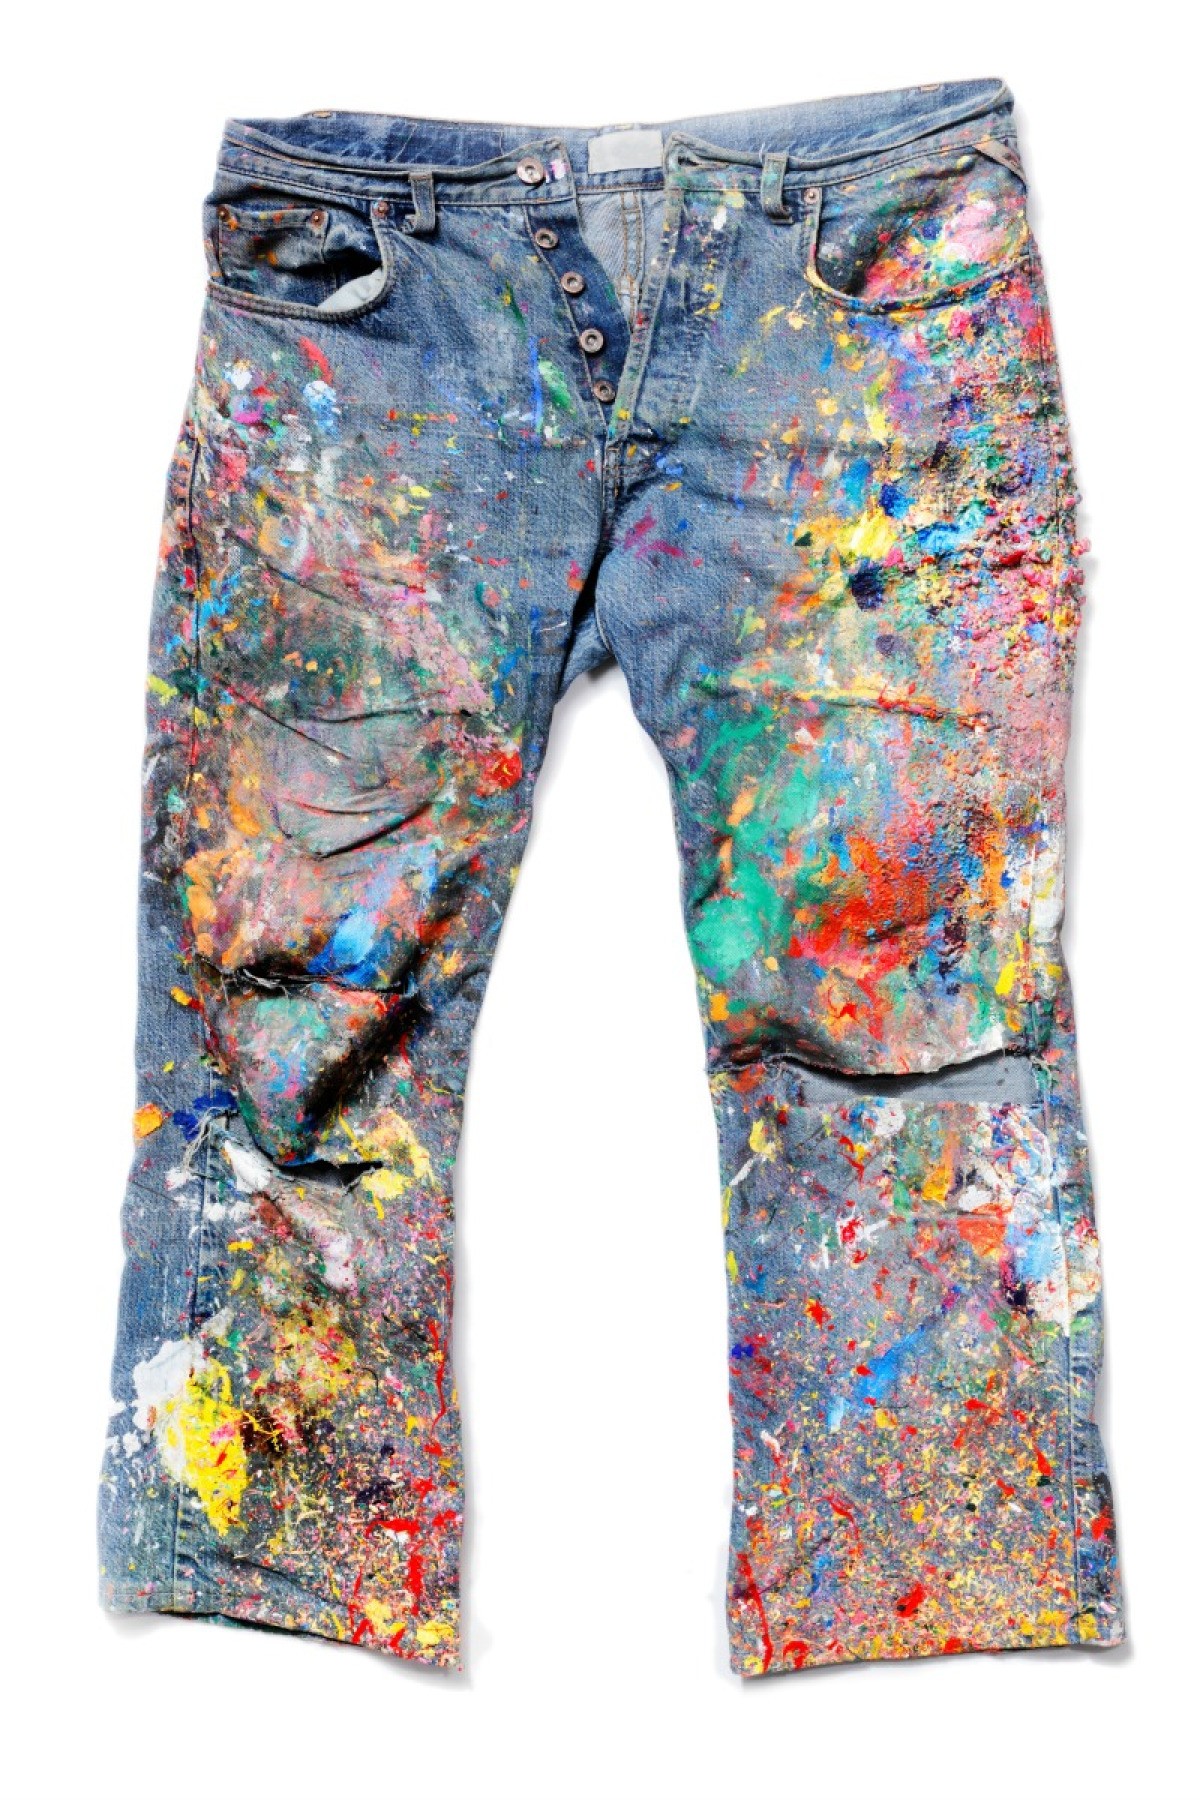 Removing Acrylic Paint From Clothing